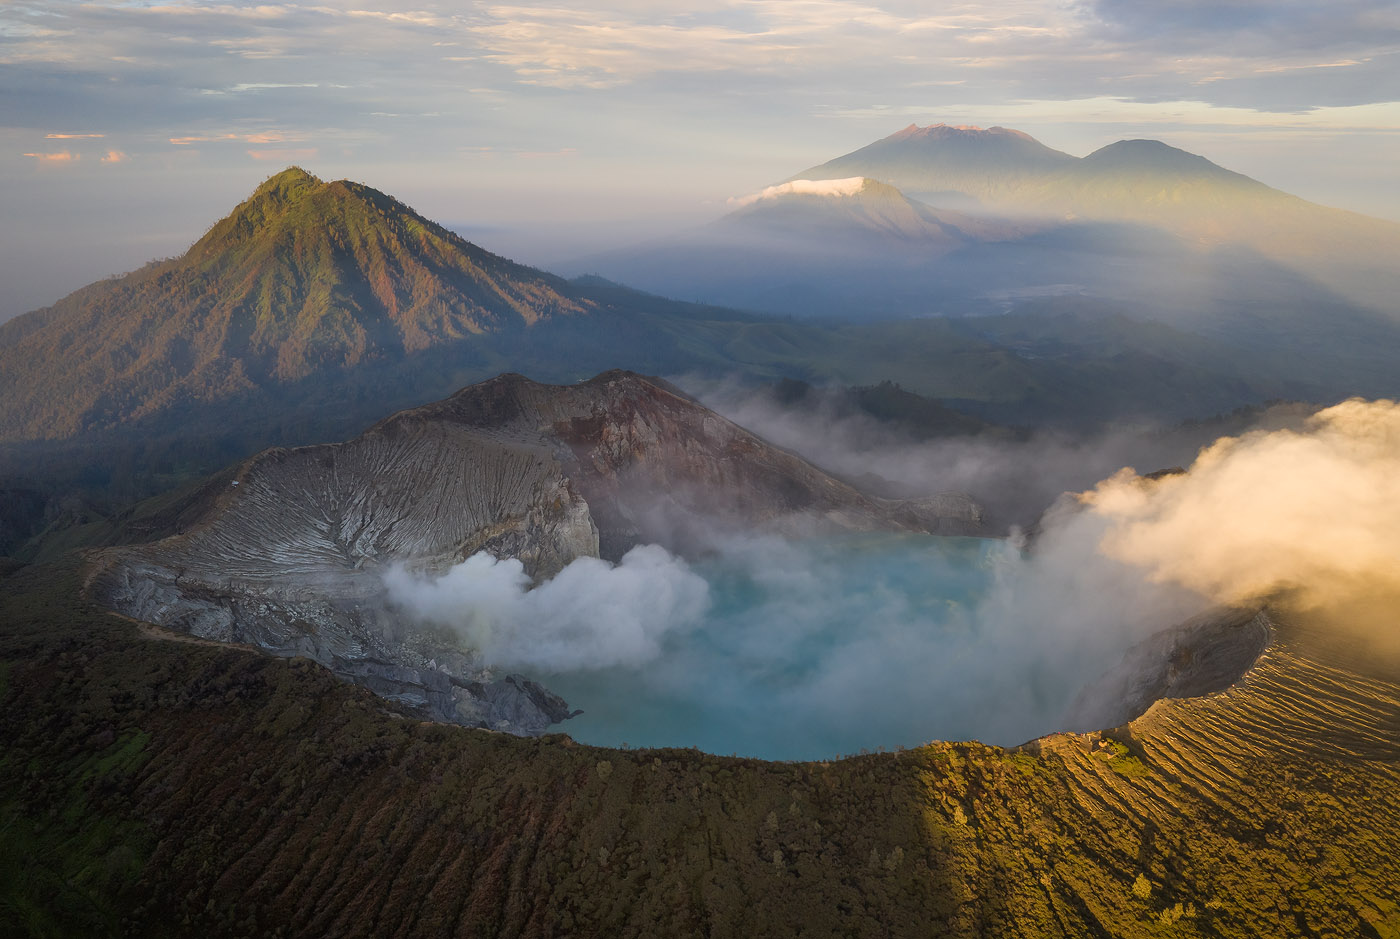 Five volcanoes in the Ijen complex: The Bottom of the frame is filled with Ijen crater. To its left, the lush, green Gunung Ranti. then farther away, from left to right: Pendil, Raung and Suket. The shadow from the bottom-left to the mid-right is cast by Gunung Merapi, just behind me.